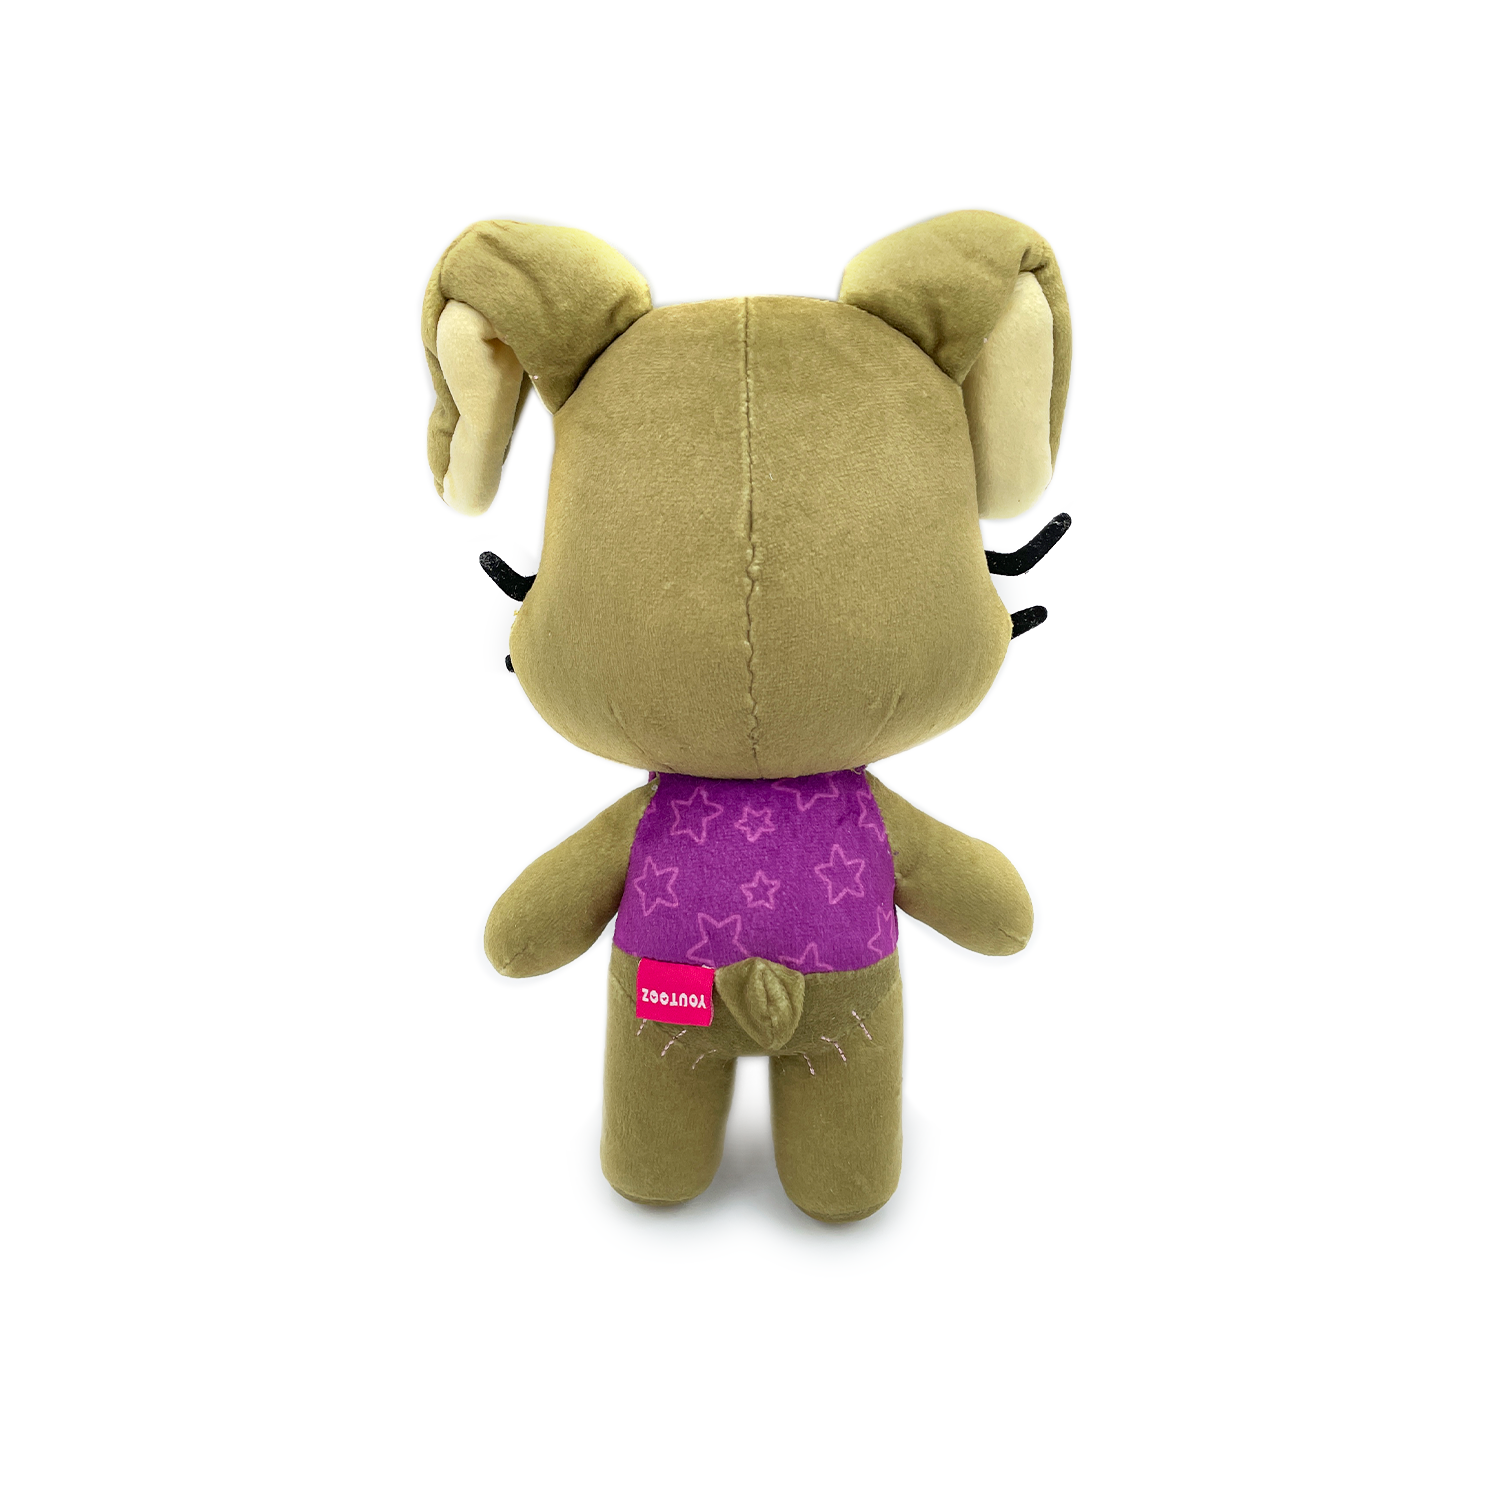 Make a Glitchtrap plush with me! He is now available in my Tik Tok sho